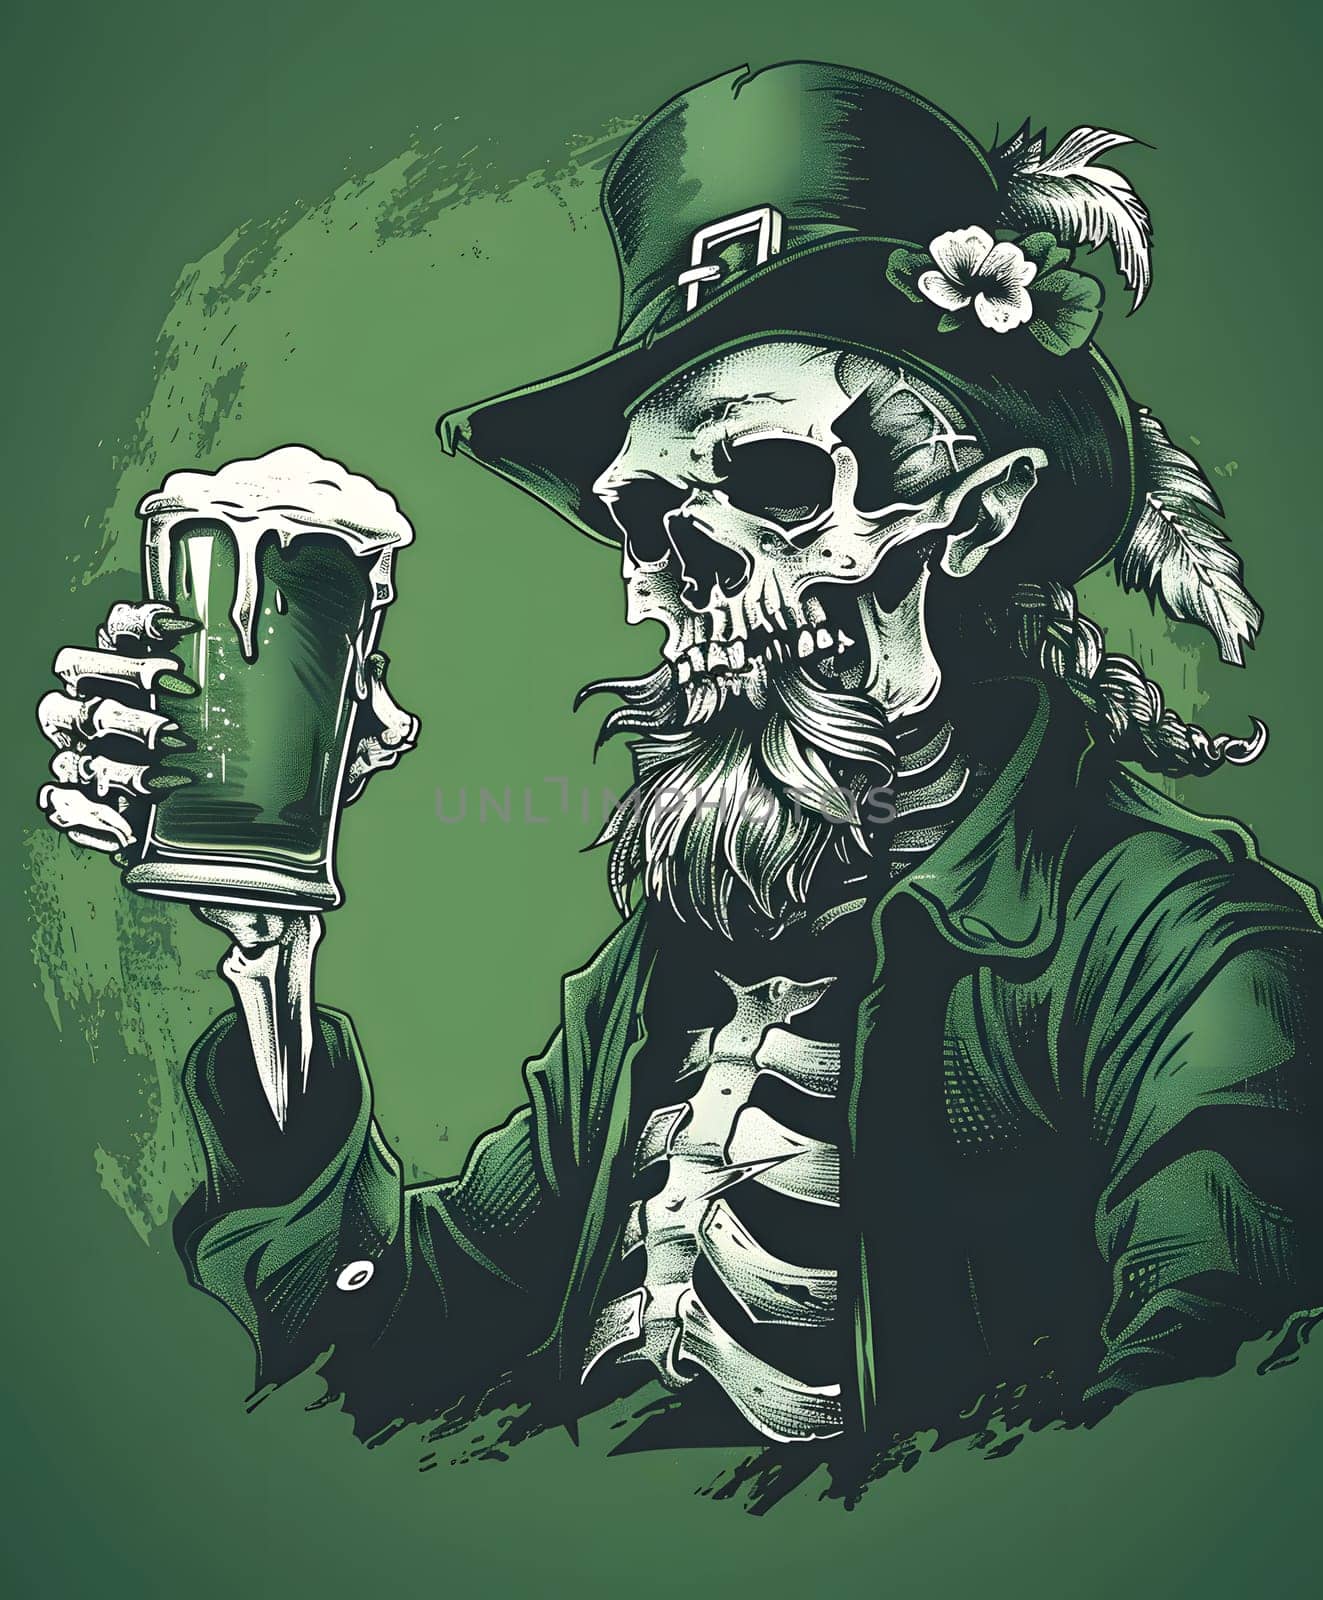 A skeleton leprechaun in a tshirt is holding a glass of beer by Nadtochiy